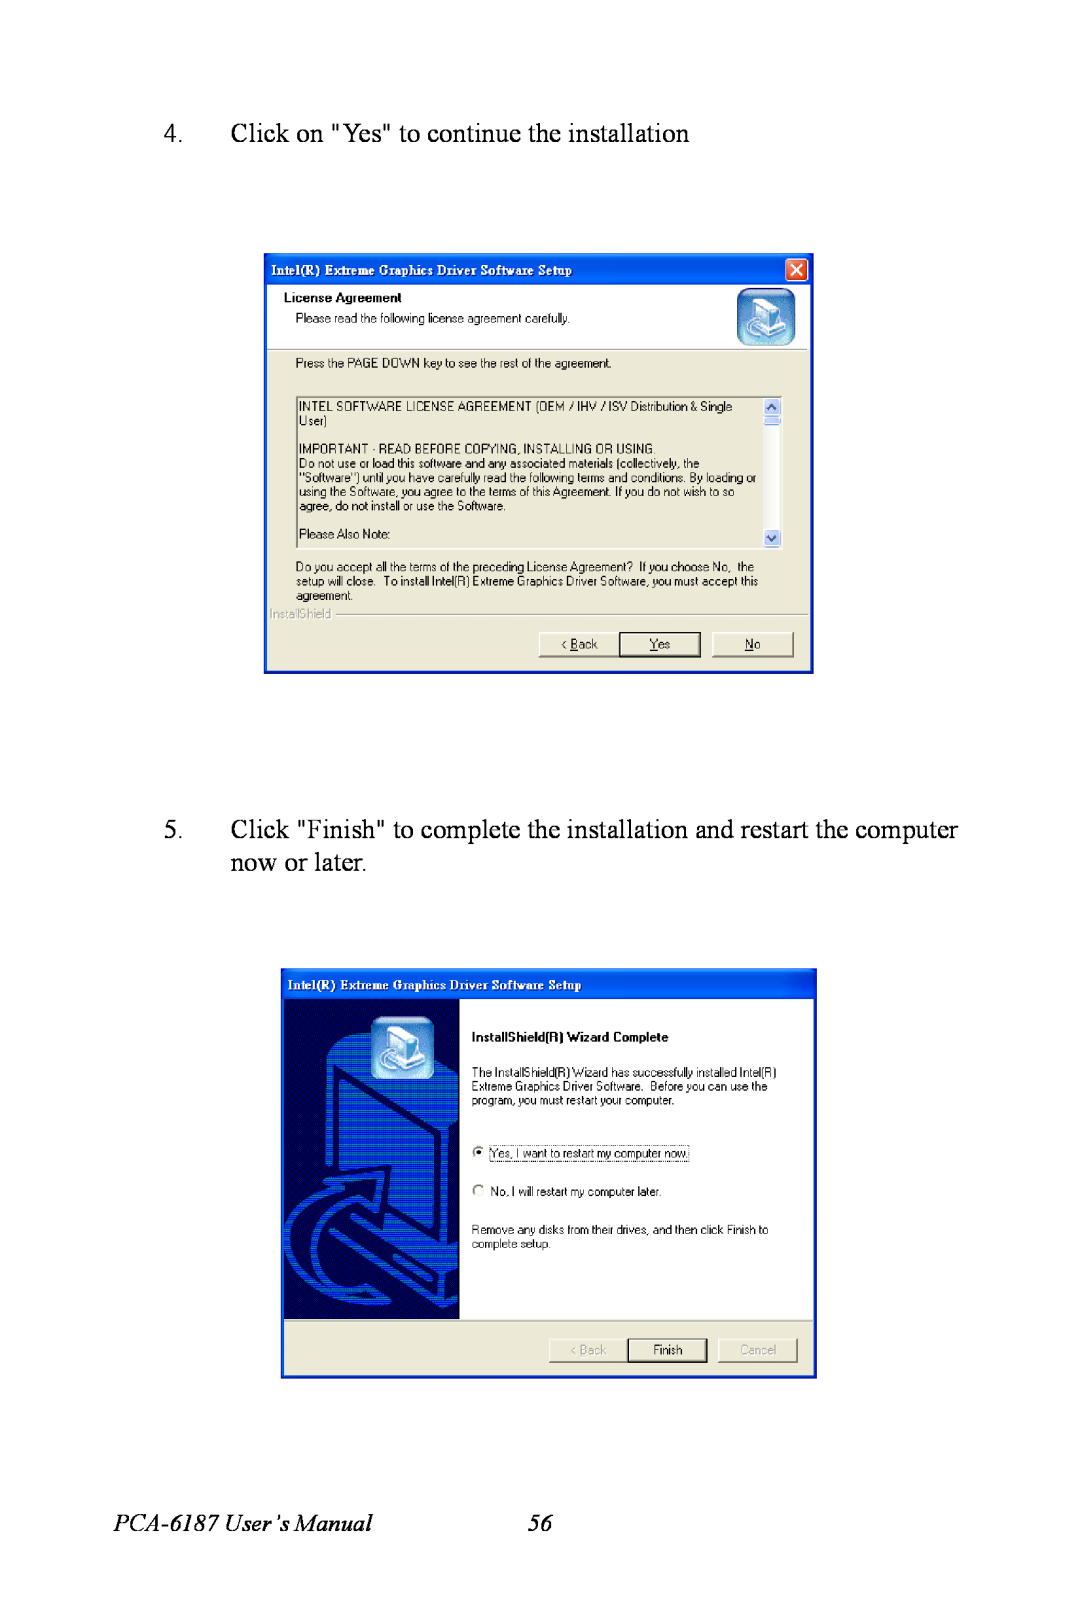 Advantech user manual Click on Yes to continue the installation, PCA-6187 User’s Manual 